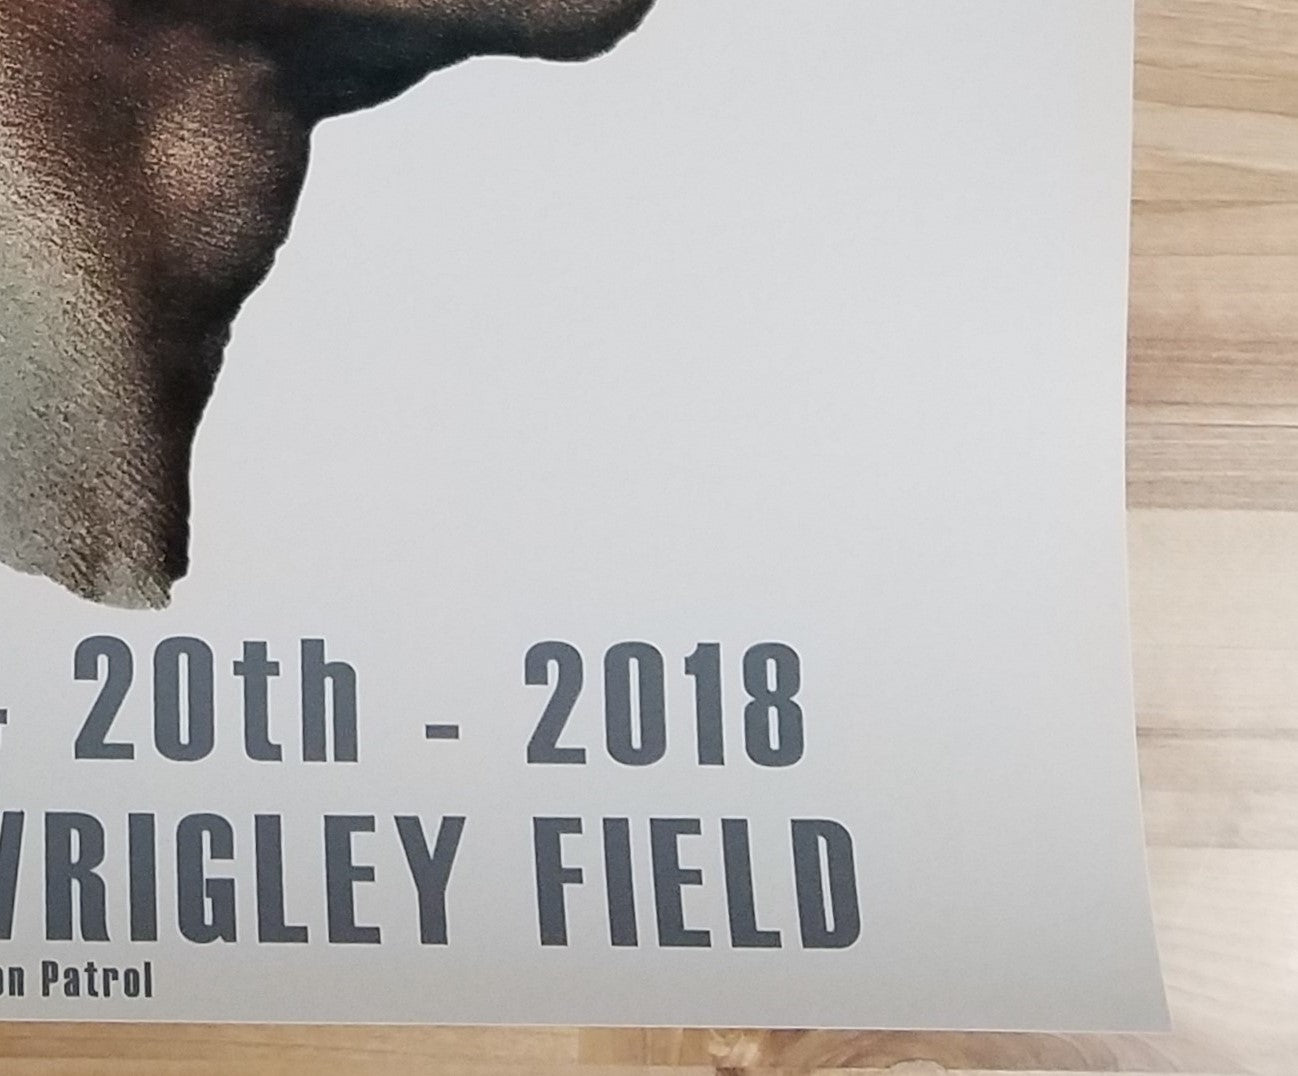 Title: Pearl Jam Matt Cunningham Bros Wrigley 2018 Official Merch Tent Poster artist: Matthew Cunningham Edition: Type: Screen Print Size: 18" x 24" Location: Chicago, IL Venue: Wrigley Field Notes: Very good condition  Created for the two Wrigley Field shows taking place on August 18th & August 20th, 2018.  Unsigned and Unnumbered - released on August 16, 2018 at the Wrigley Field Merch Tent across the street from the field.